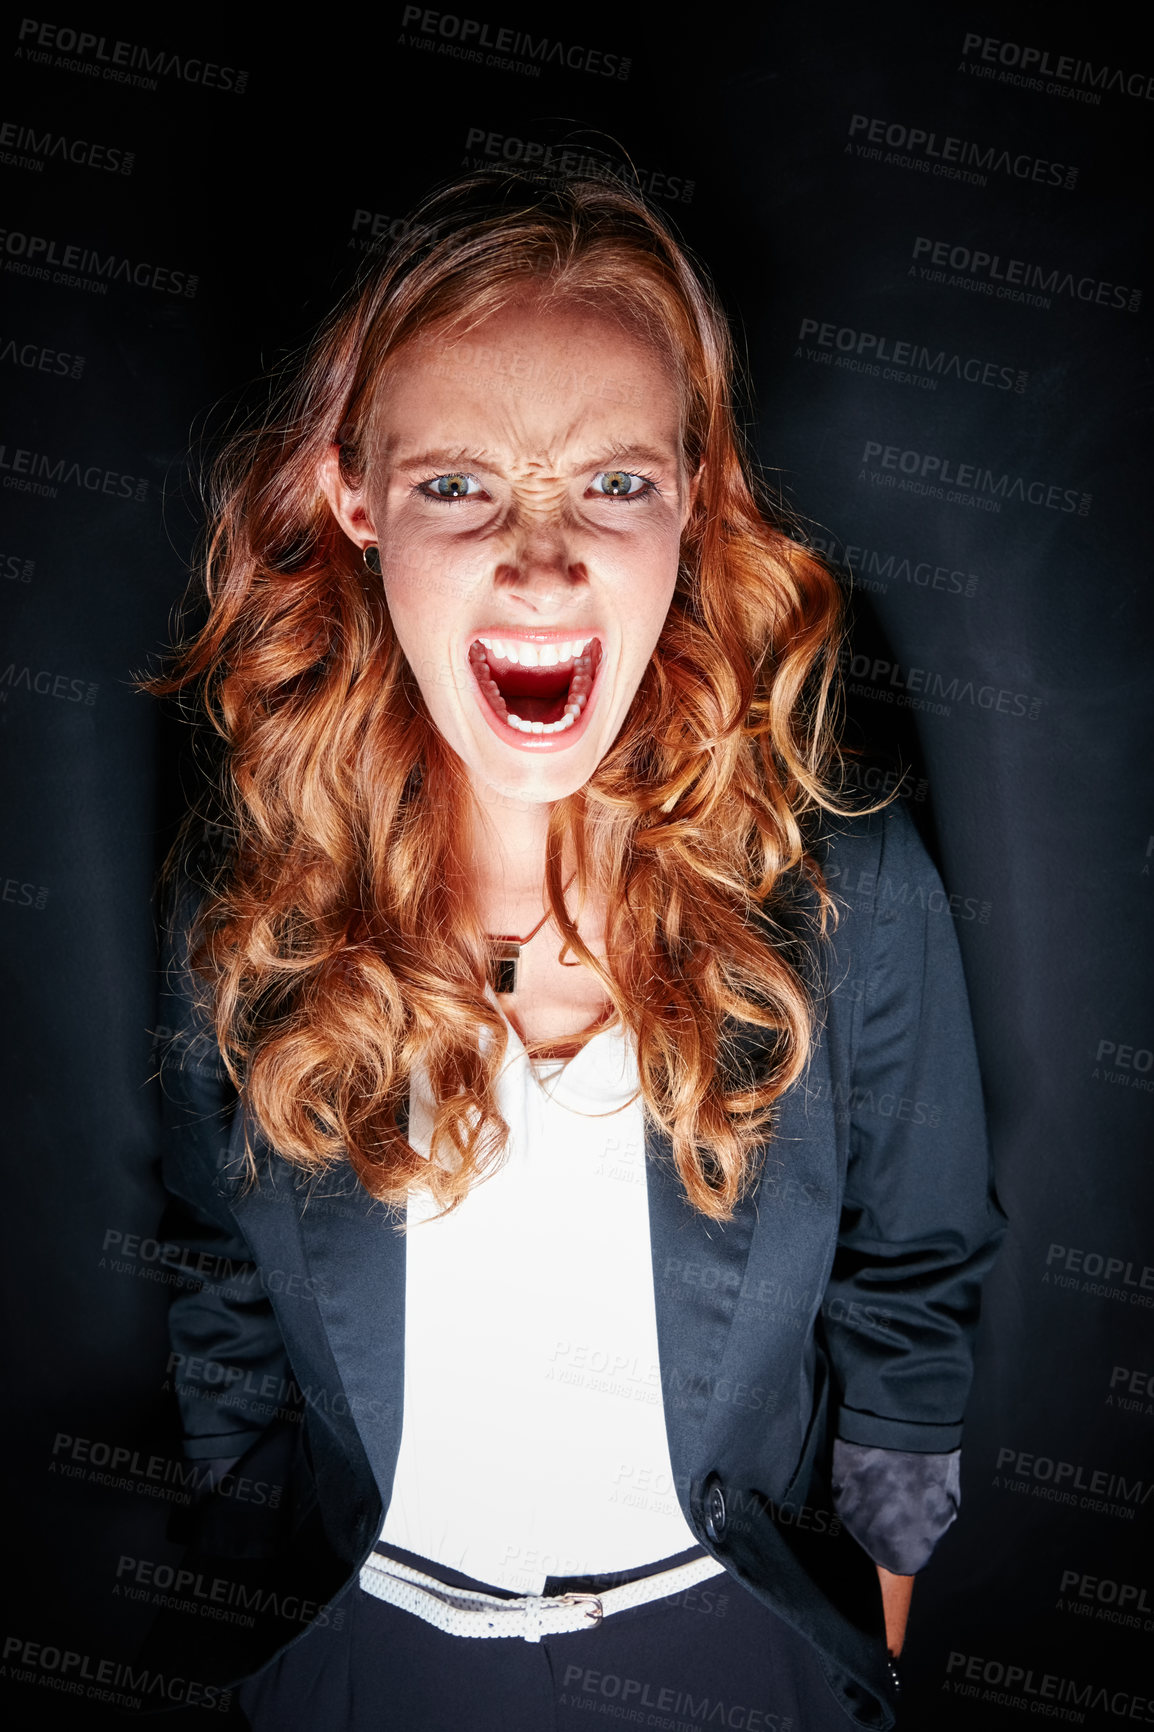 Buy stock photo Studio portrait of a young woman making a crazy face against a dark background